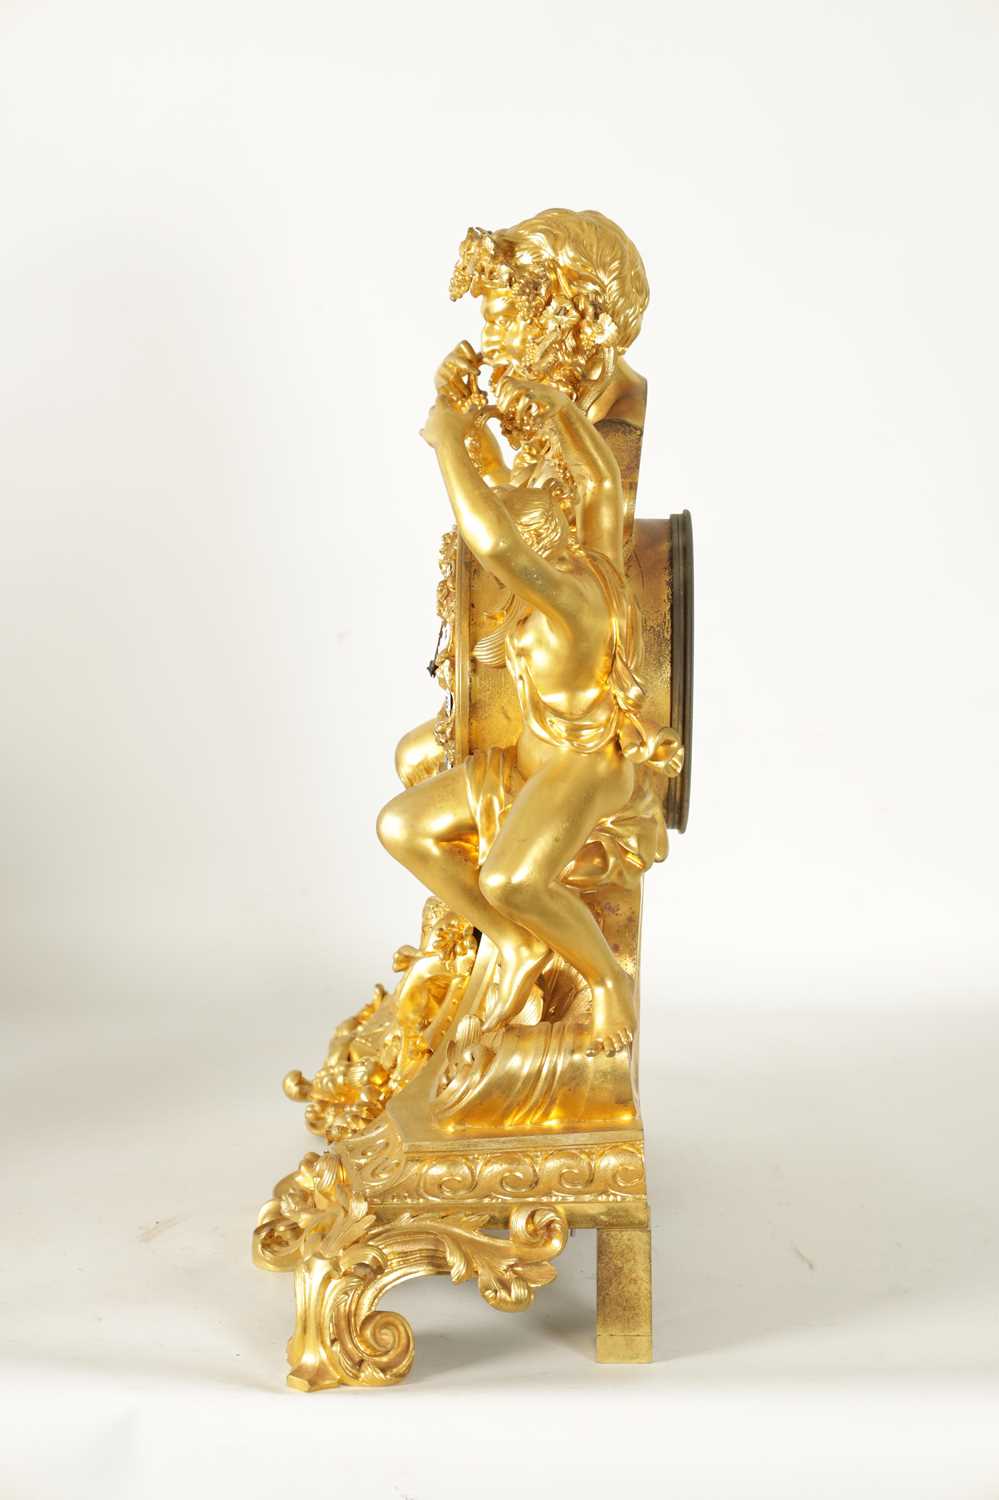 A FINE QUALITY MID 19TH CENTURY FRENCH ORMOLU FIGURAL MANTEL CLOCK - Image 8 of 11